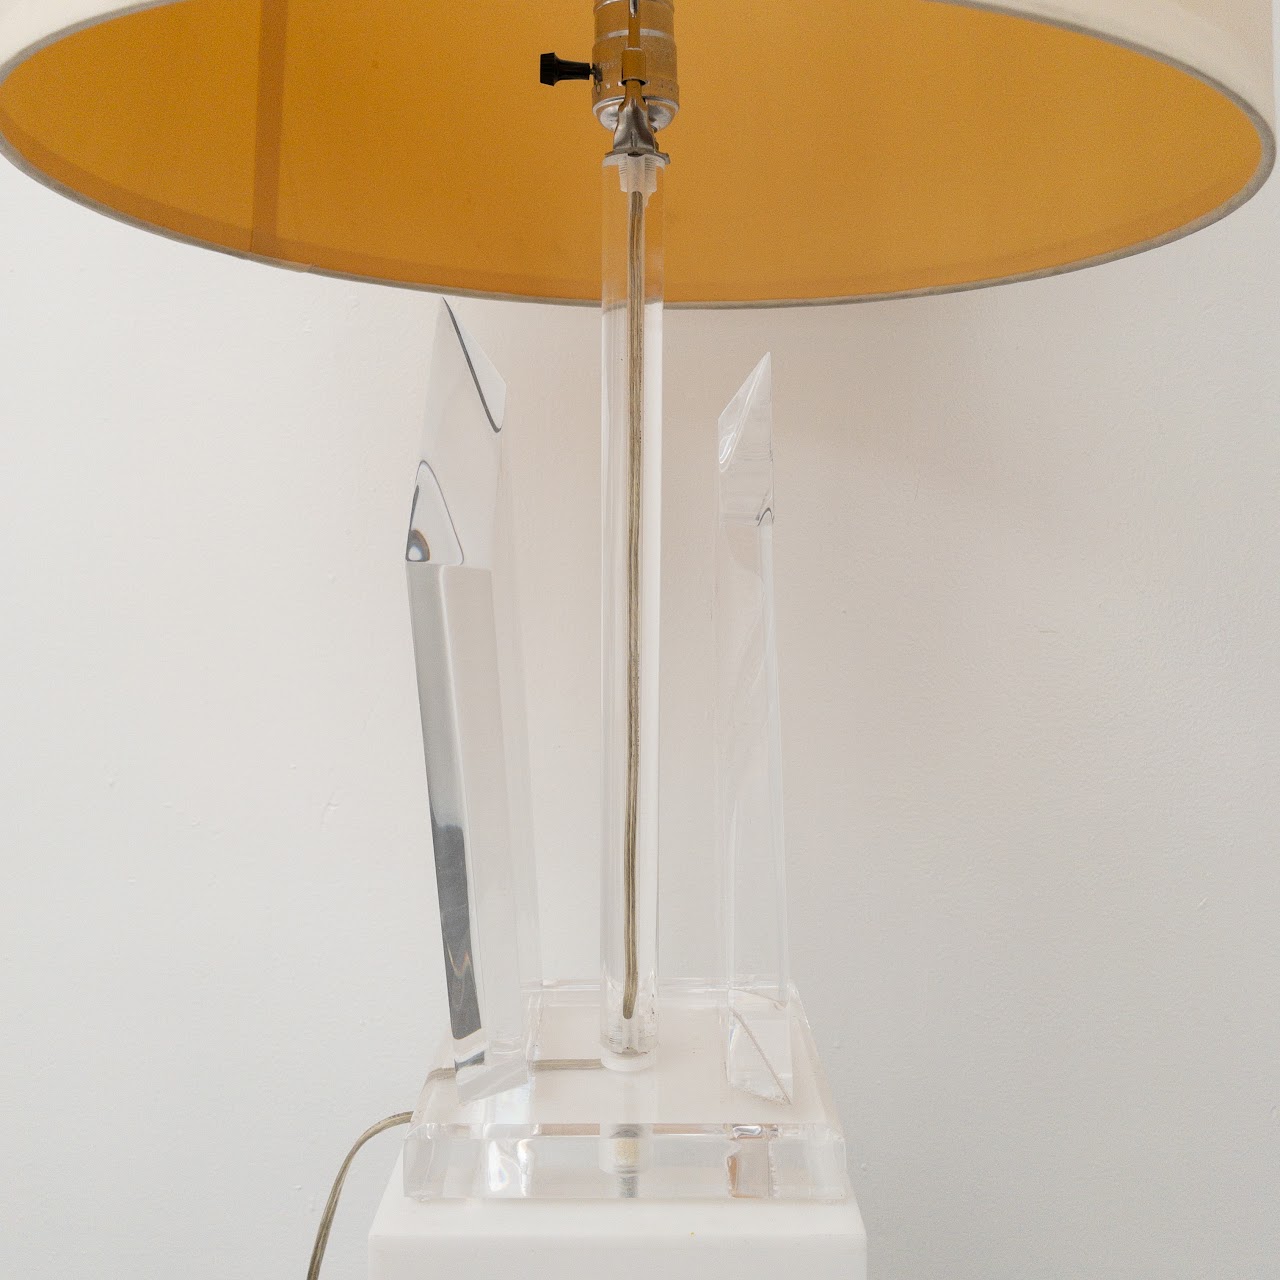 Van Teal Signed Mid-Century Modernist Lucite Table Lamp